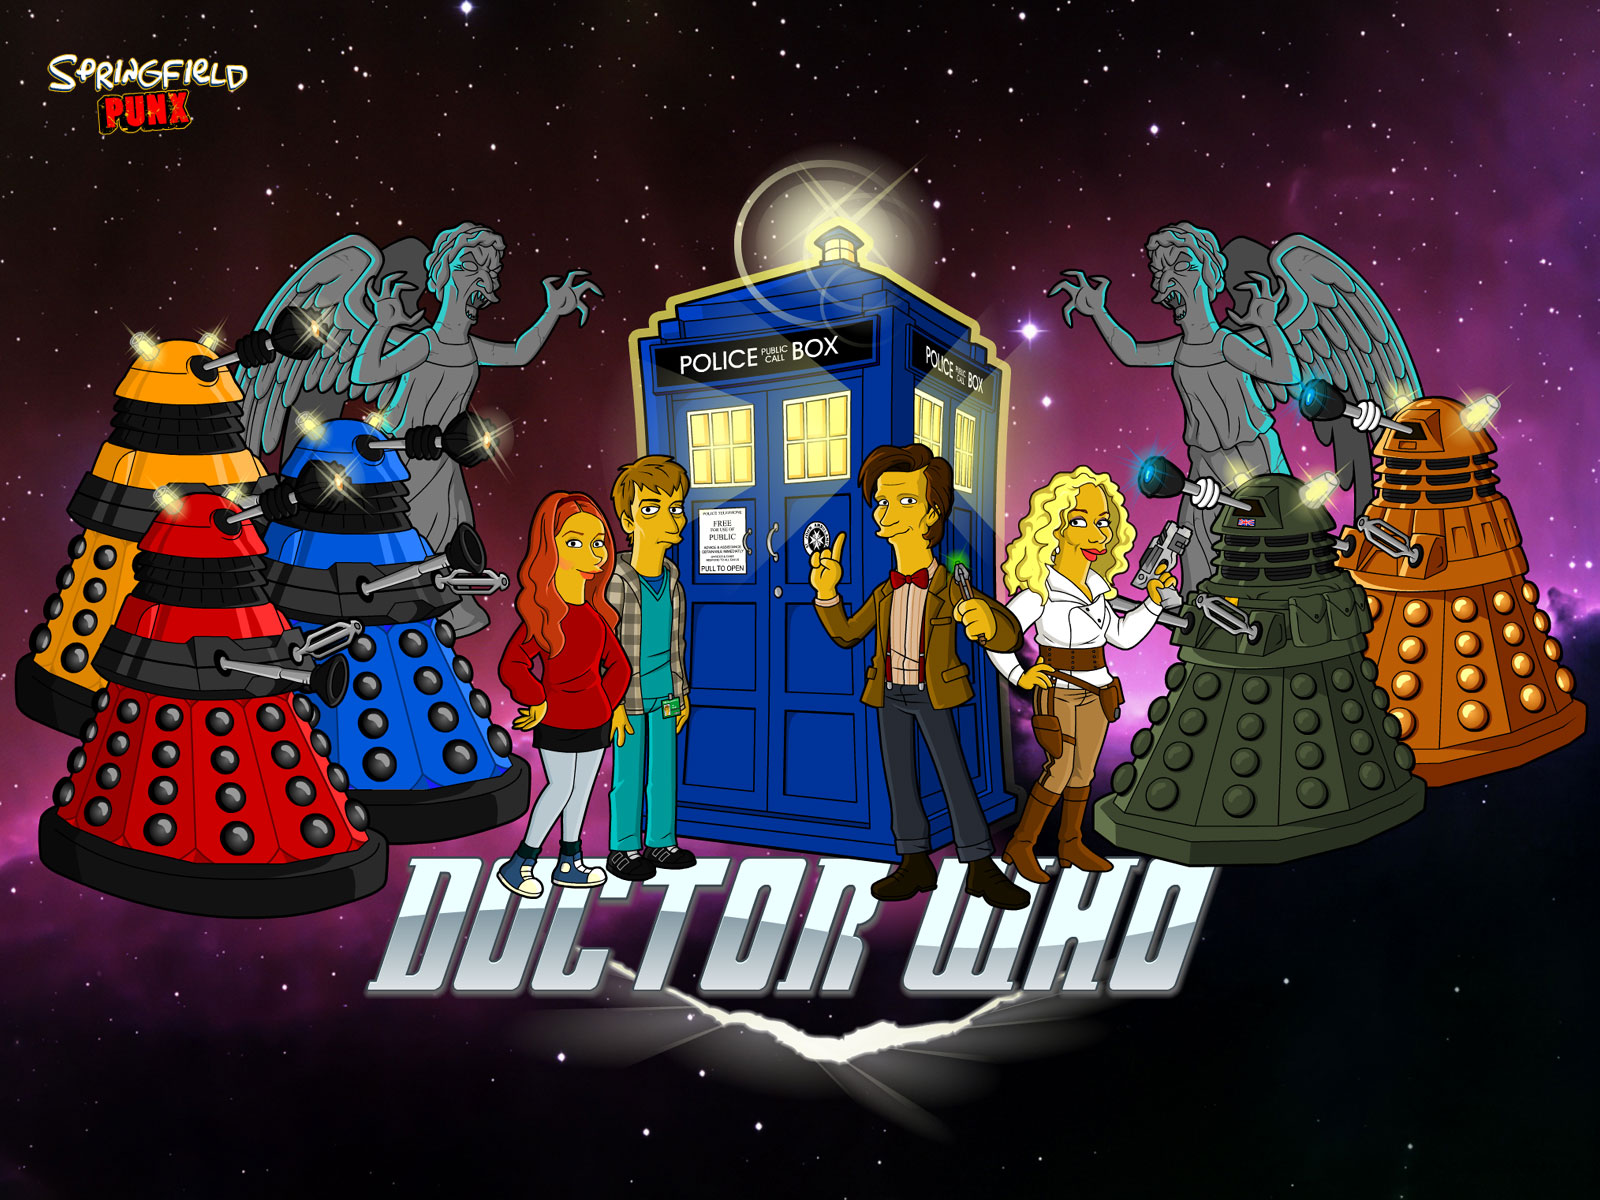 Doctor Who Bom Springfield Punx Series Wallpaper